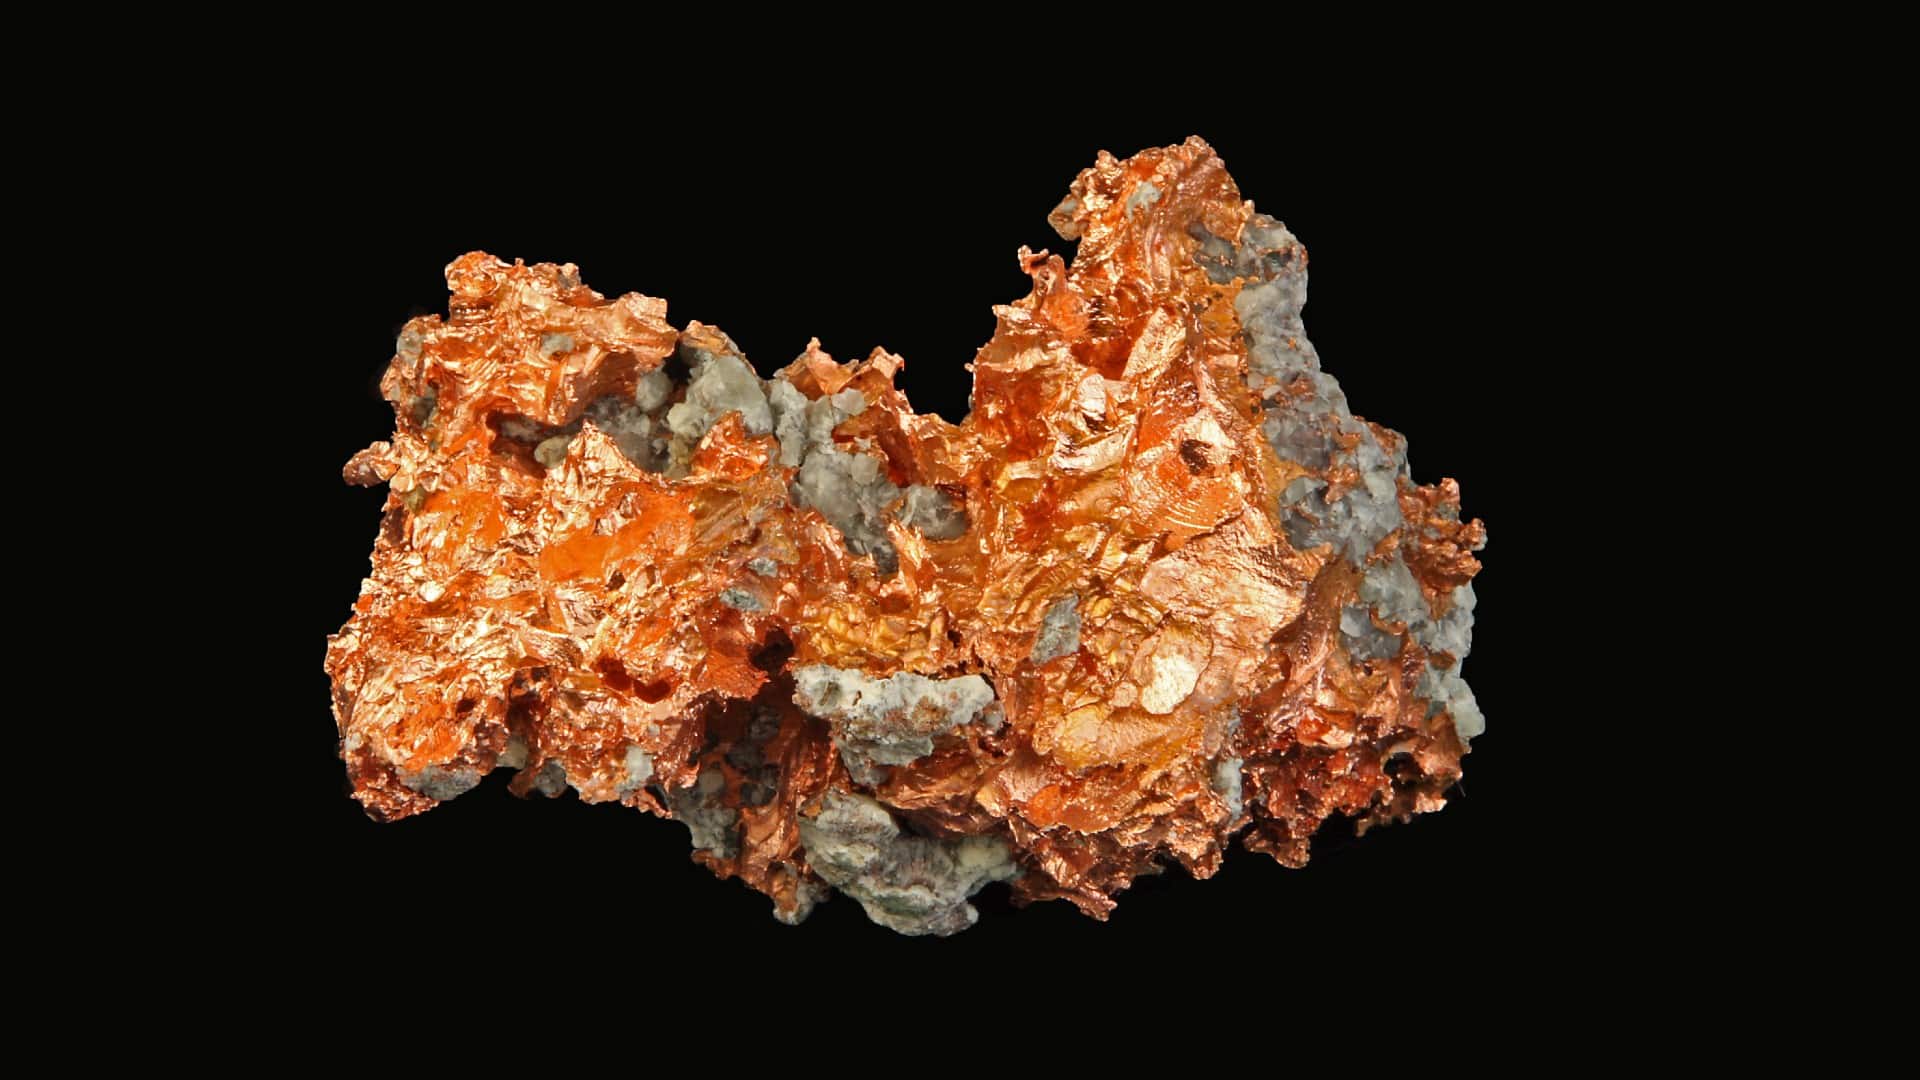 asx copper share price represented by chunk of mined copper